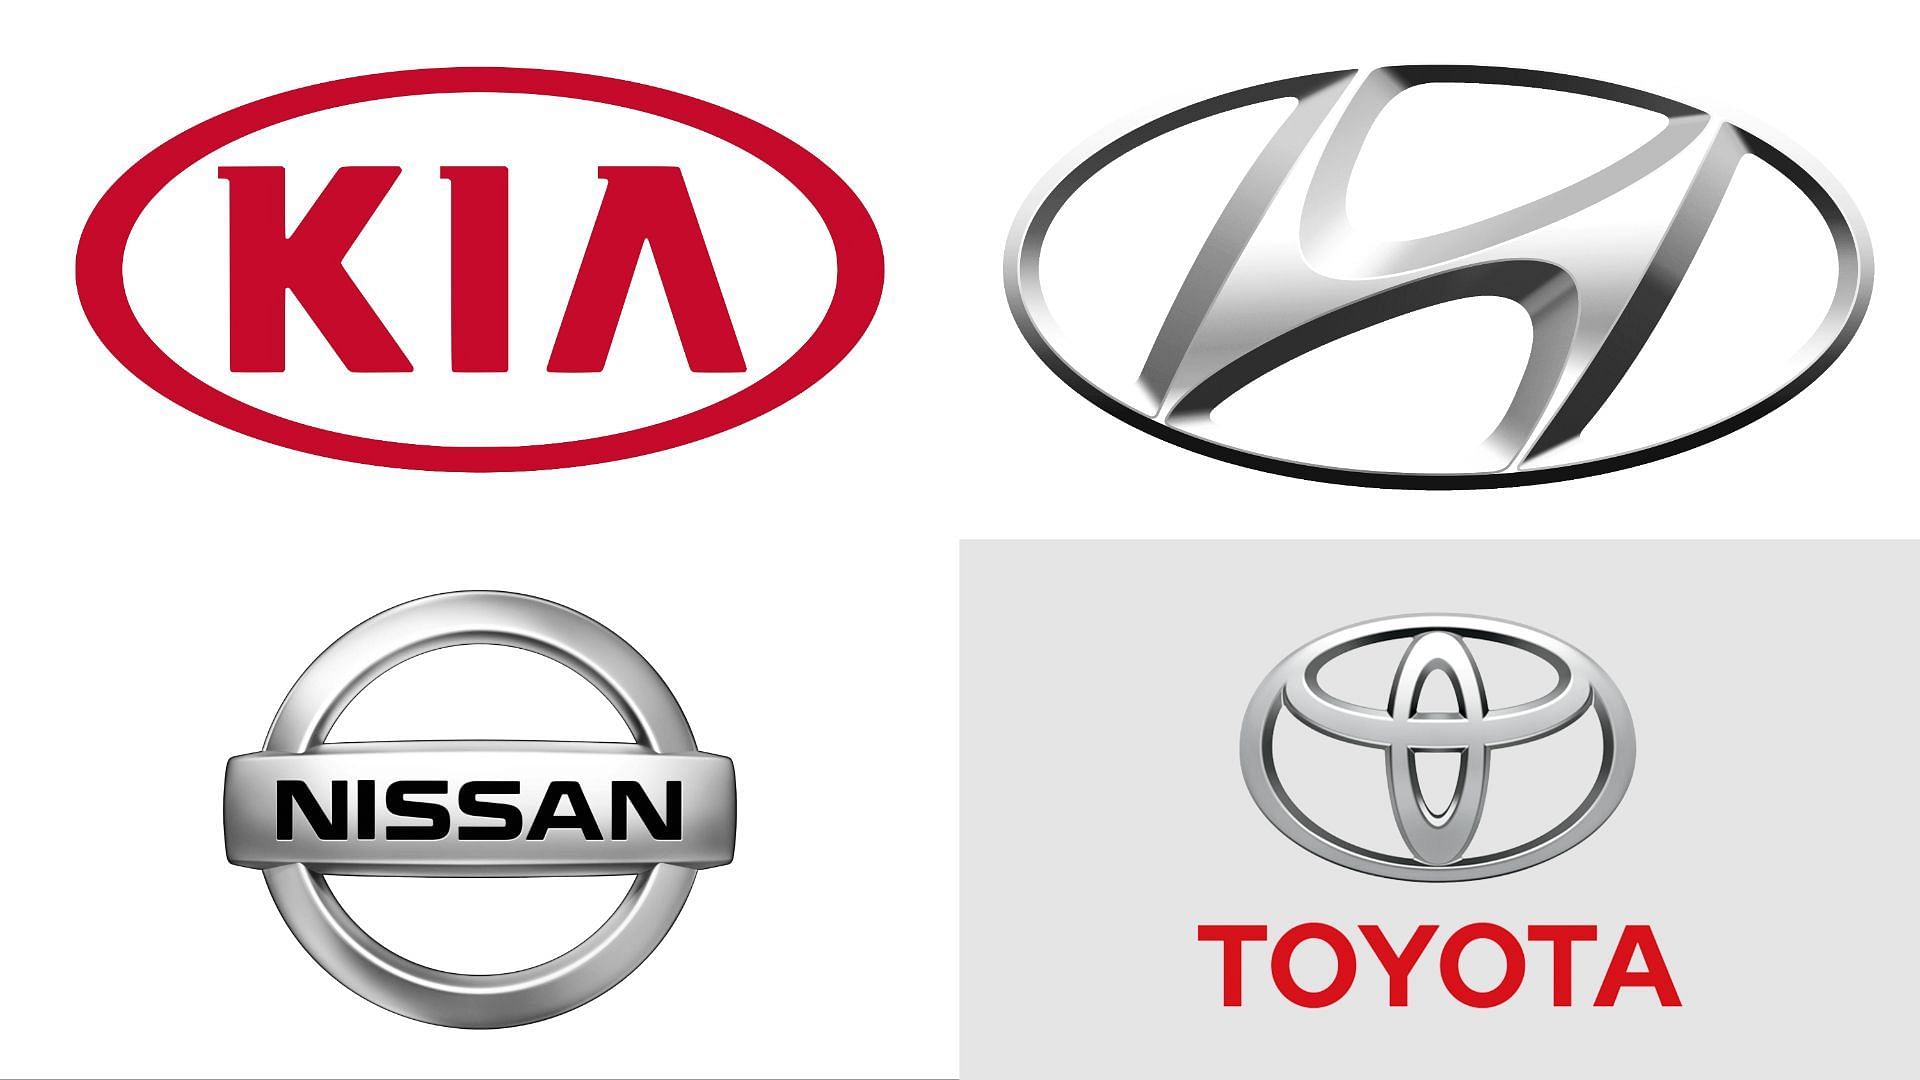 The United States National Highway Traffic Safety Administration issues recall alerts for various vehicle and car models from Kia, Hyundai, Toyota, Nissan, and others (Image via Kia/Hyundai/Toyota/Nissan)